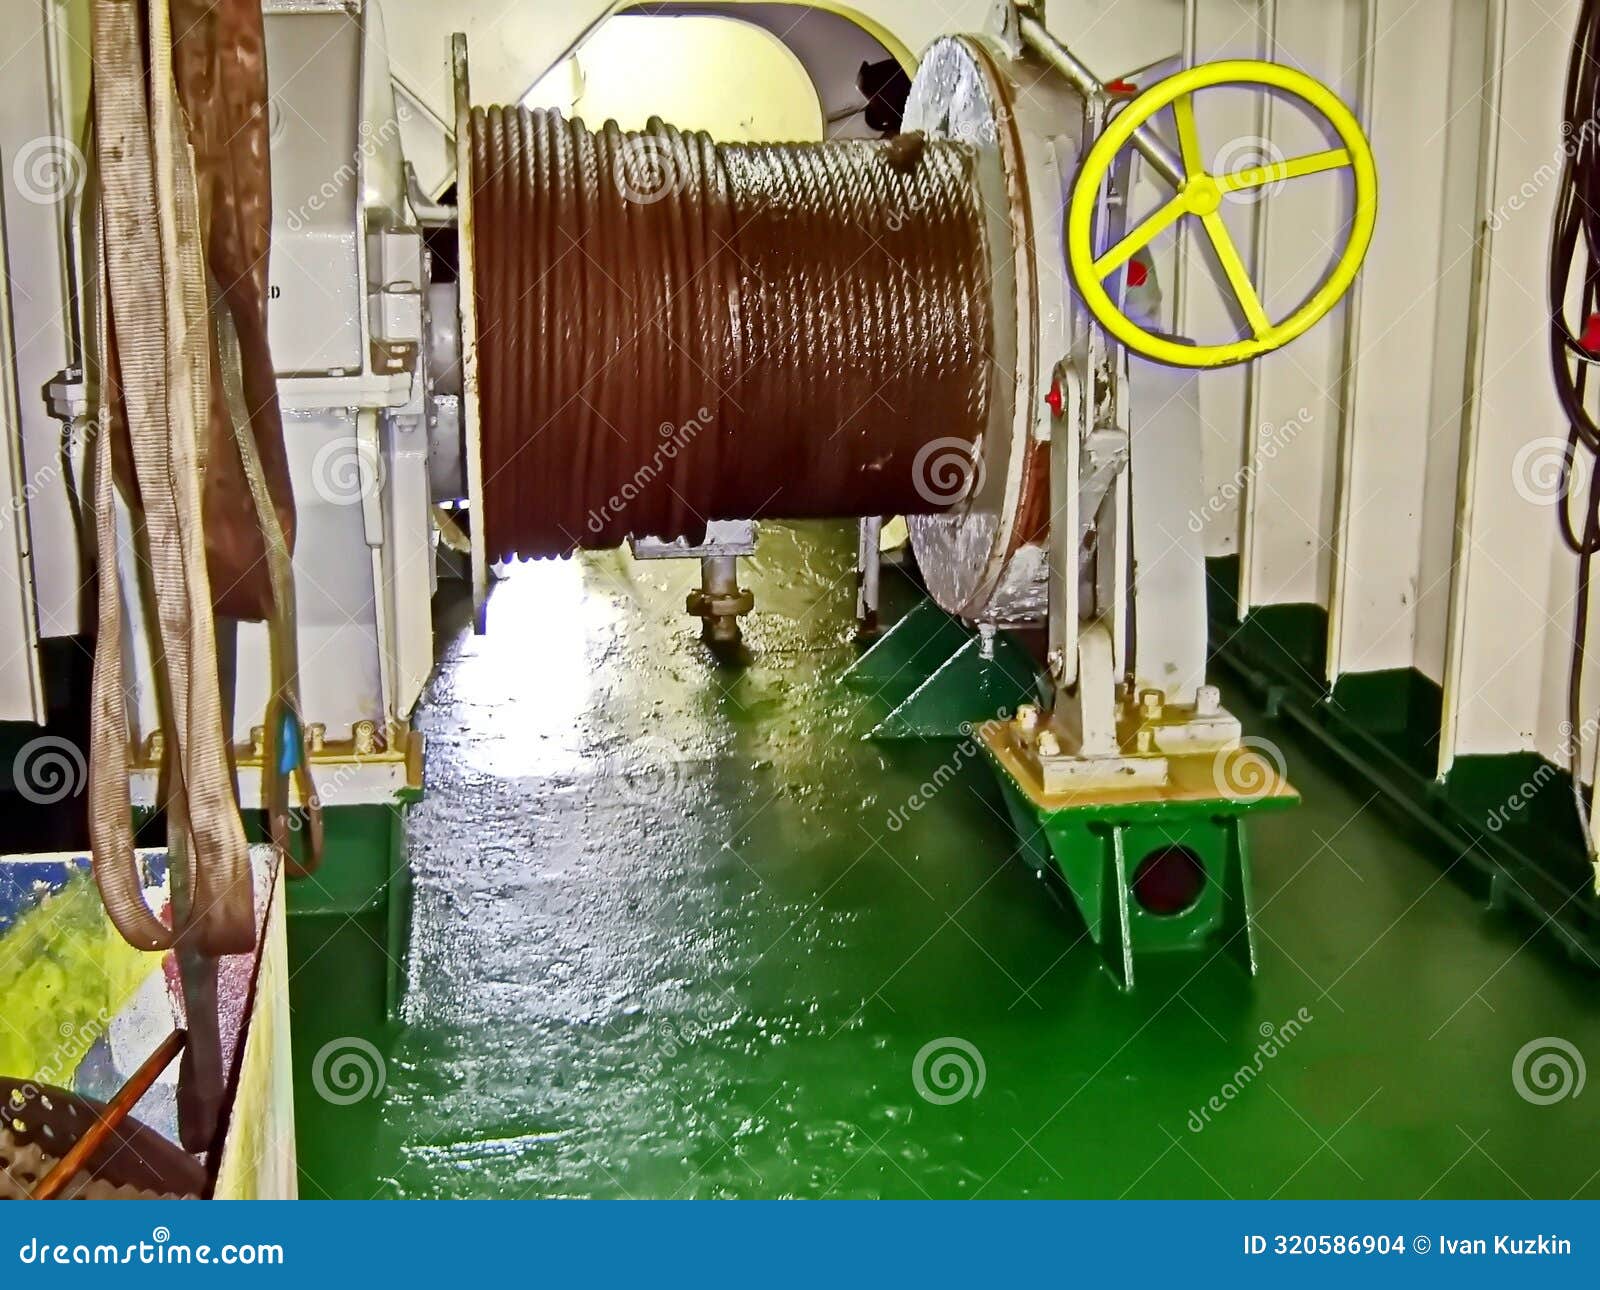 the various constructions, anchoring and mooring equipment and systems on the upper and inner decks of the sea vessel.